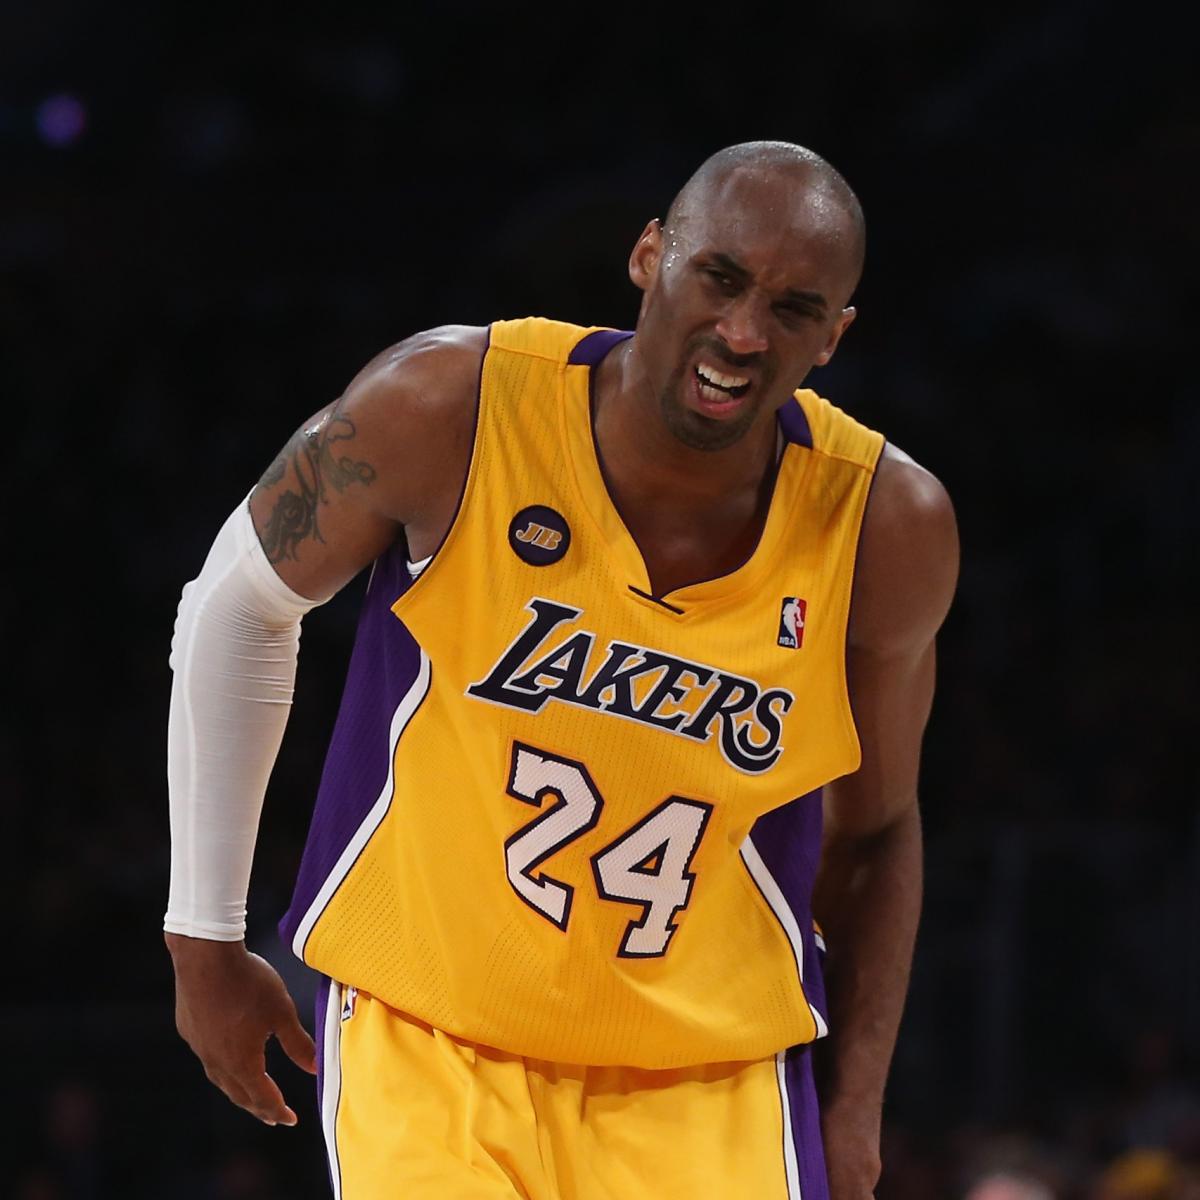 Lakers News: Kobe Bryant's Injury One of the Saddest Scenes in Sports